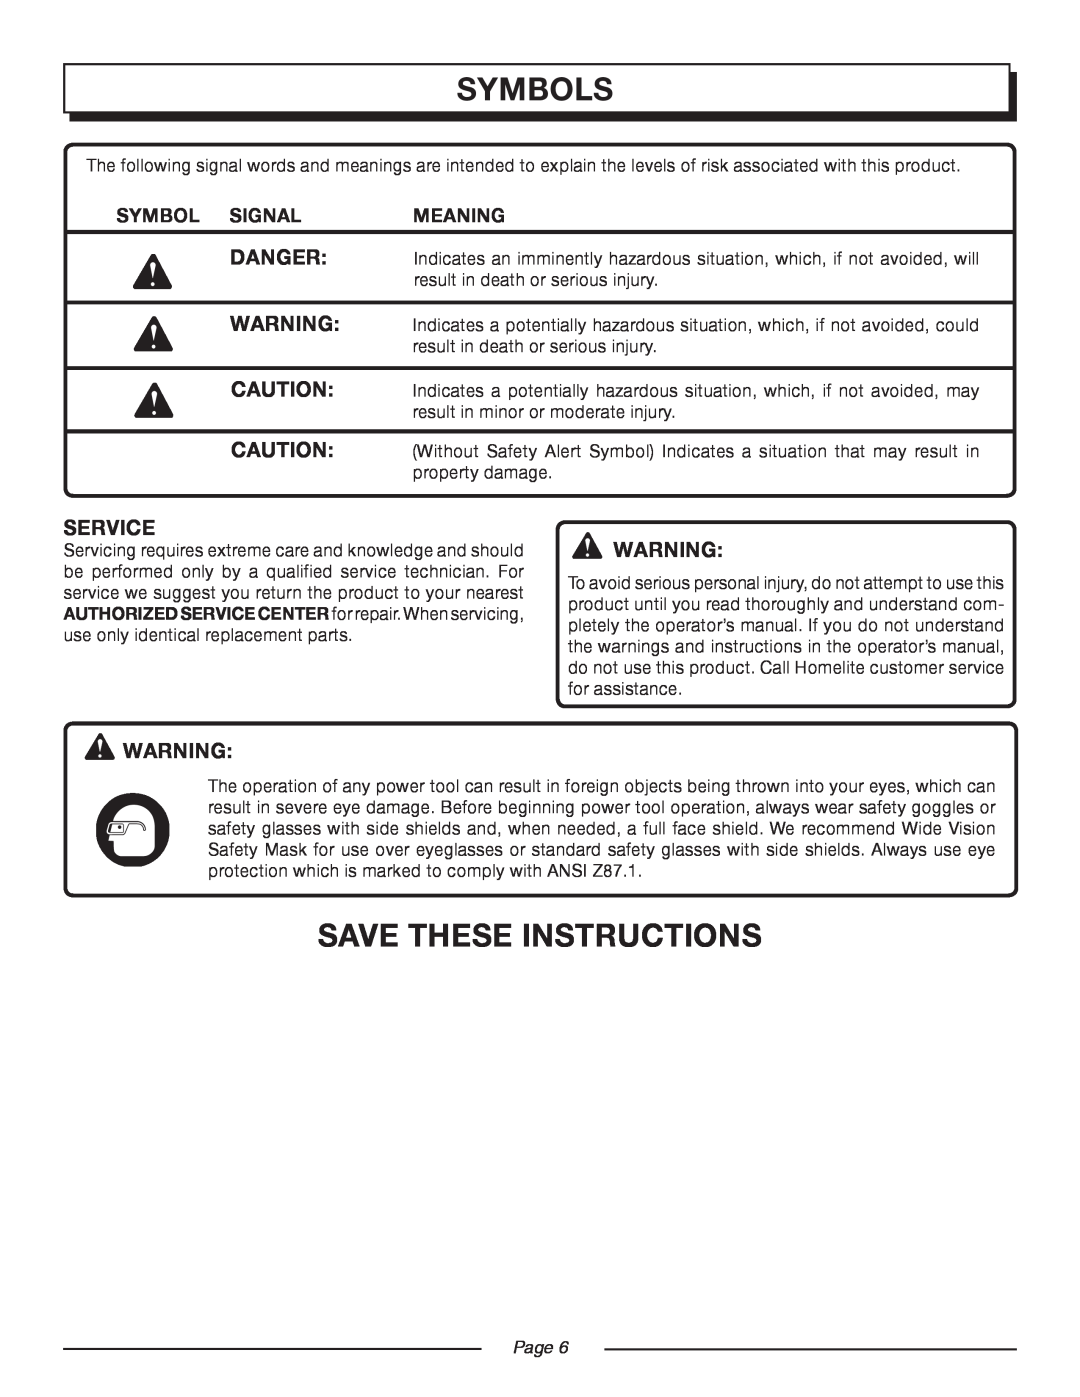 Homelite UT08947 manual Save These Instructions, Symbols, Symbol Signal, Meaning, Page 